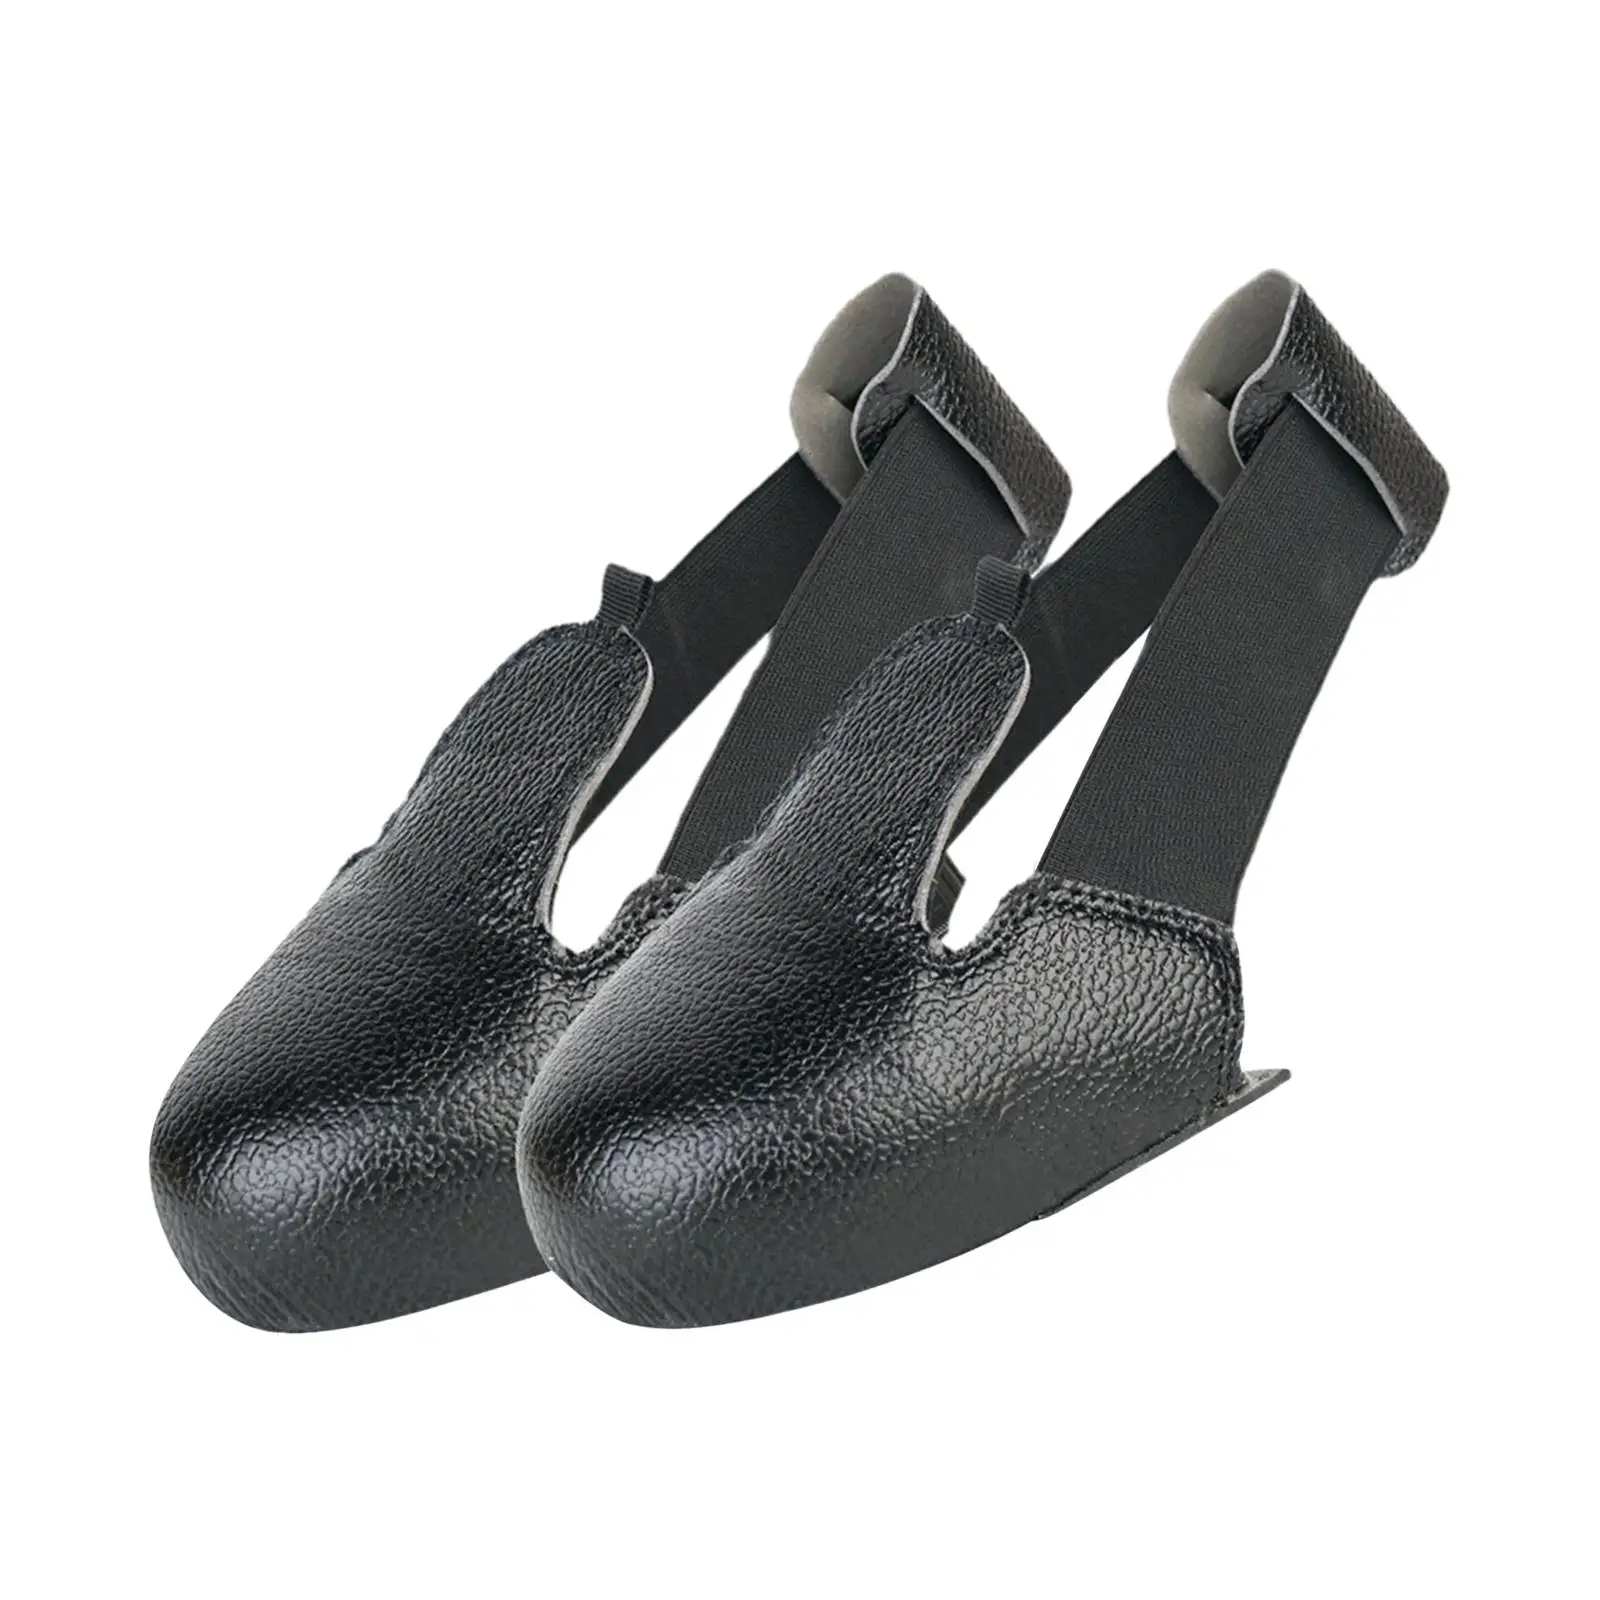 Toe Cap Safety Overshoes, Leather Overshoes Cover, Workplace Anti Smash Cover Toe Cap Safety Shoe Covers